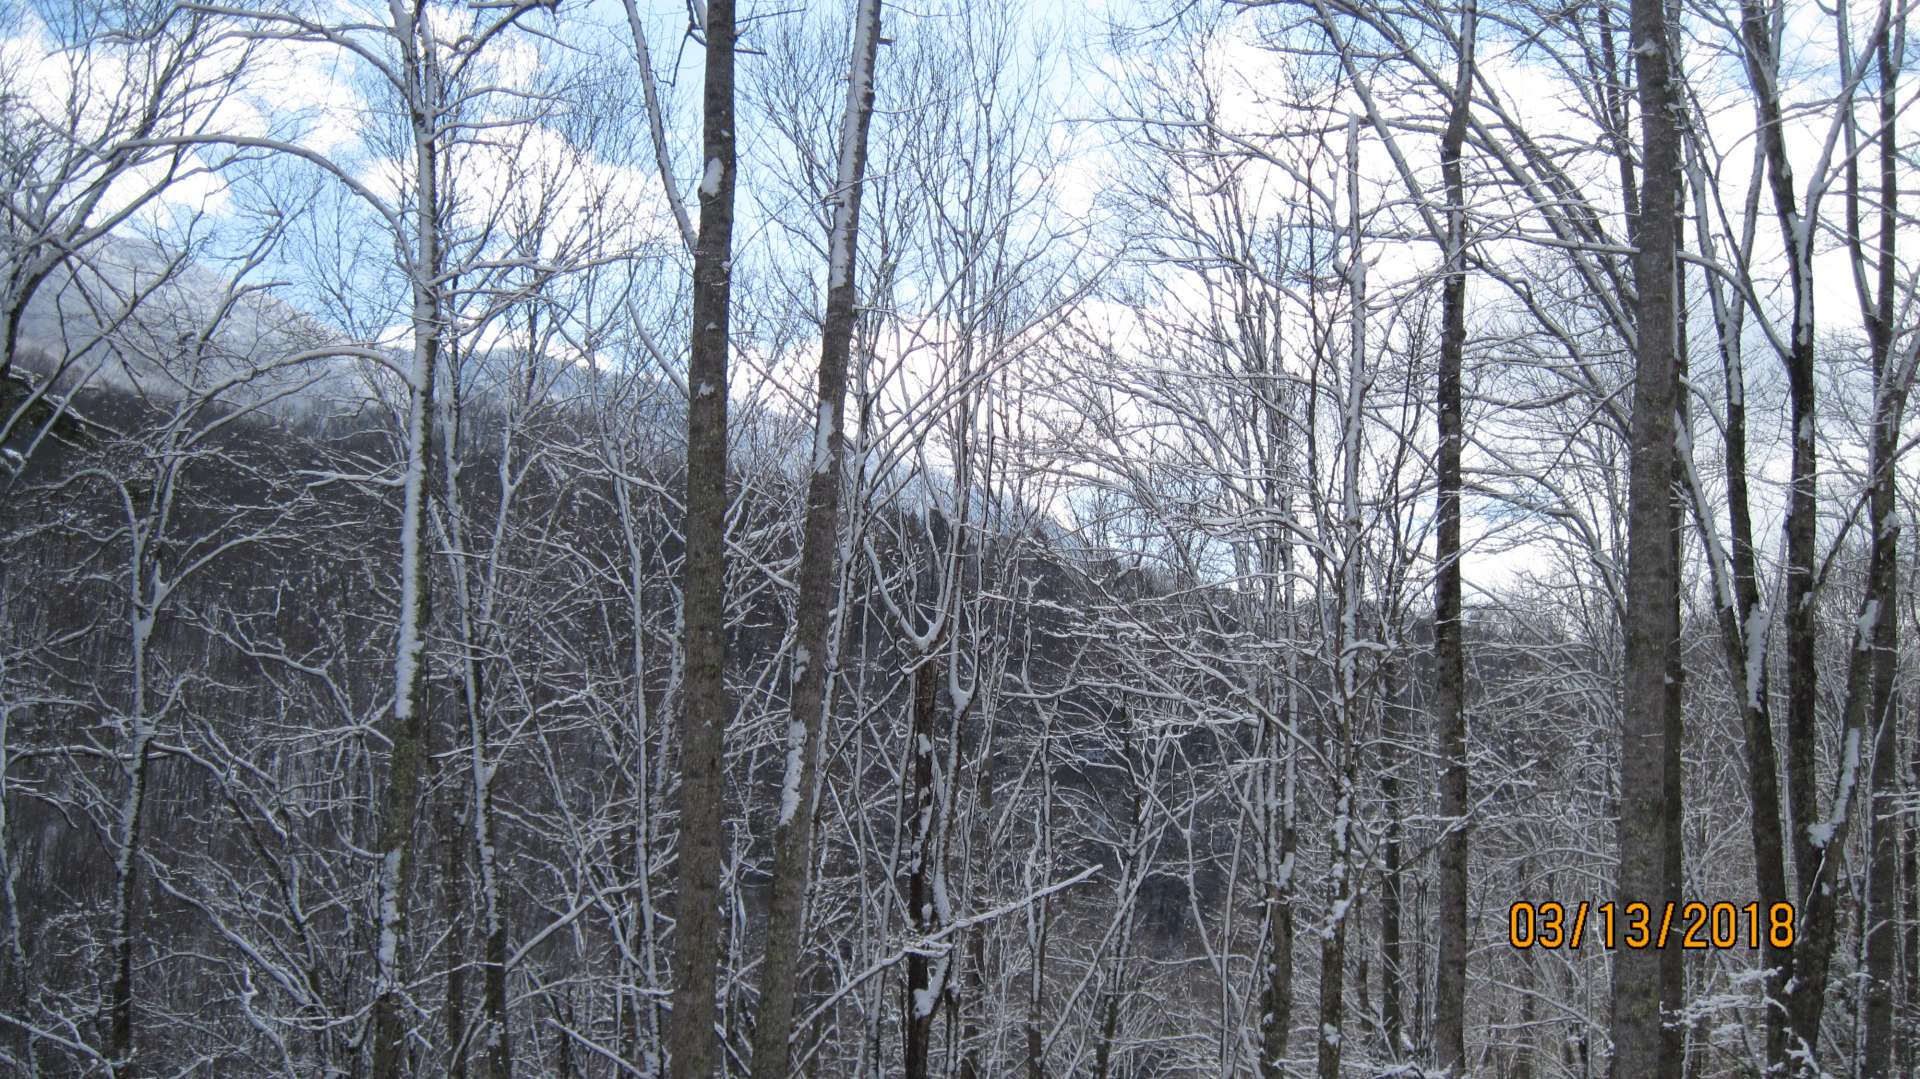 This photo provided by the seller shows how enchanting the winter season can be here on this sweet 4 acre tract.  Offered at only $25,000, this 4 acre mountain tract with driveway roughed in to the top boundary with two cleared areas for potential building sites, plenty of native hardwoods, conifers, and mountain foliage, is the ideal private location for your mountain cabin or home. The Creston location is convenient to Boone, West Jefferson, and the NC High Country. H285